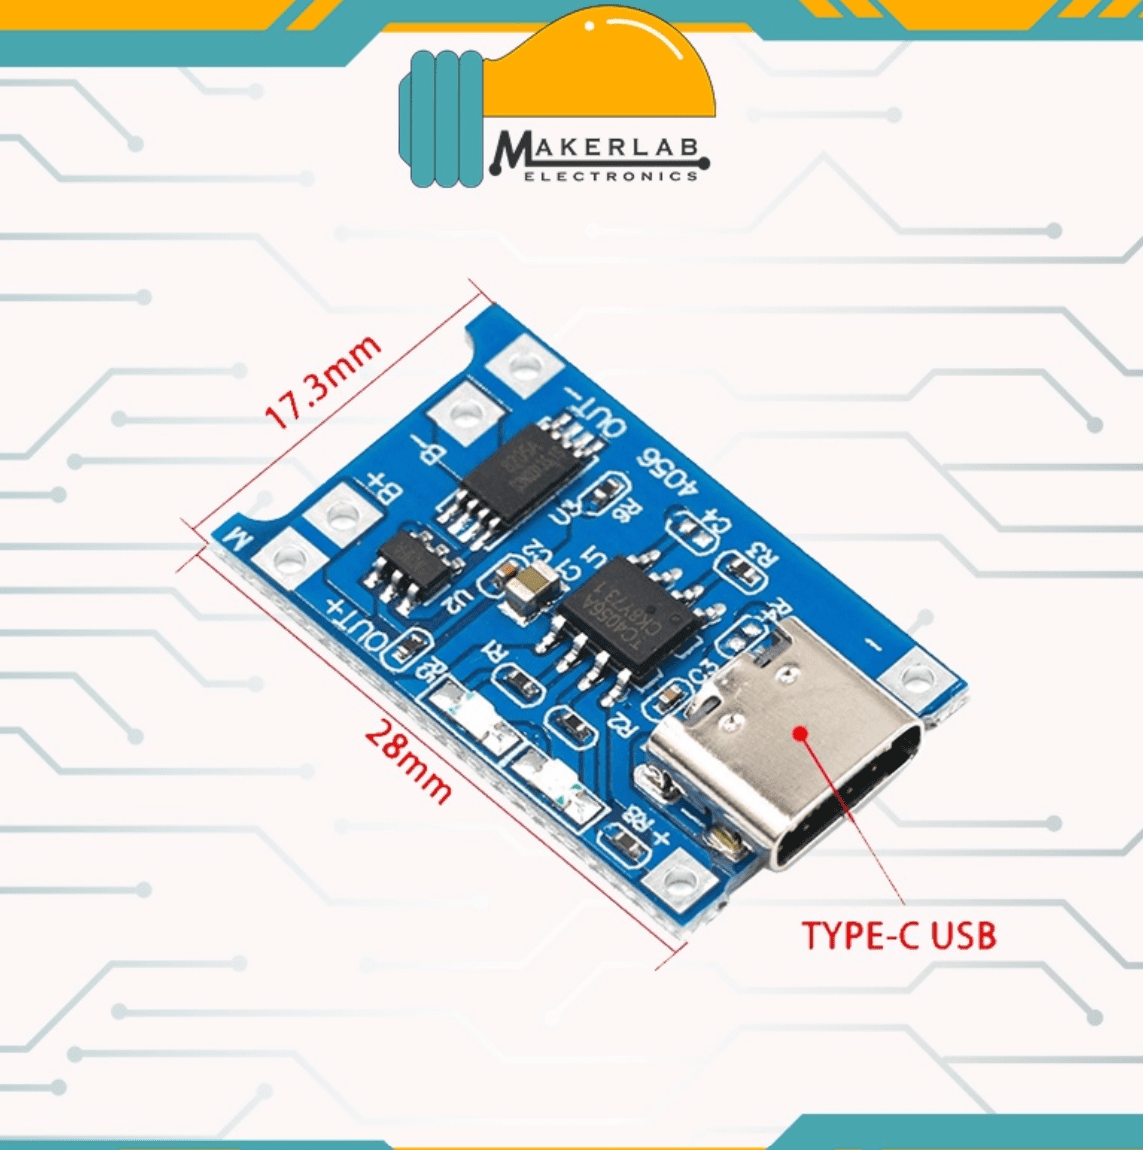 Type C Micro USB 5V 1A 18650 TP4056 Lithium Battery Charger Module Charging Board With Protection